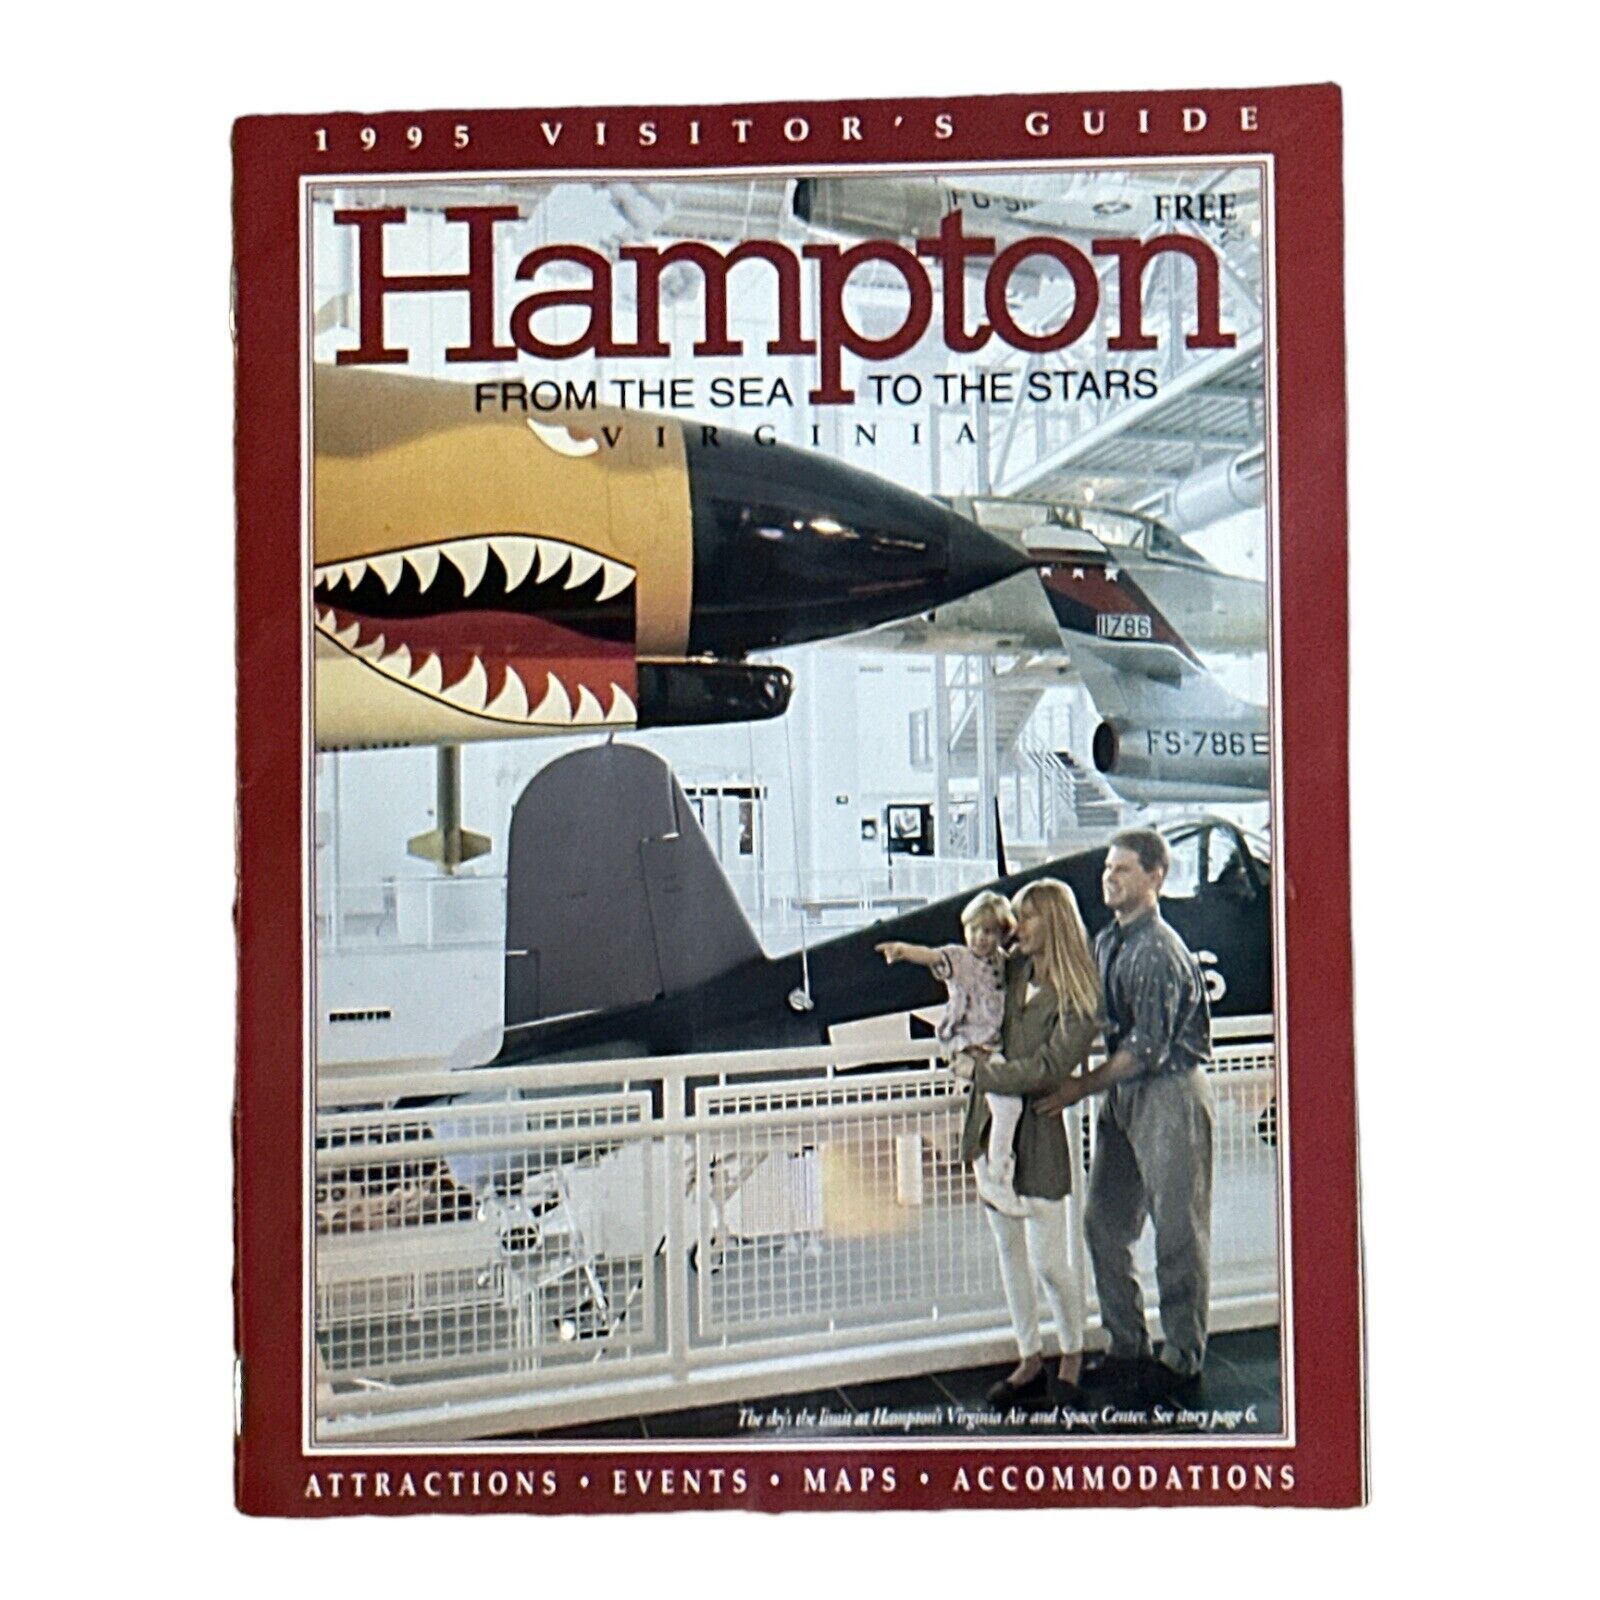 Hampton Virginia Visitors Guide 1995 Attractions Maps Events Accommodations